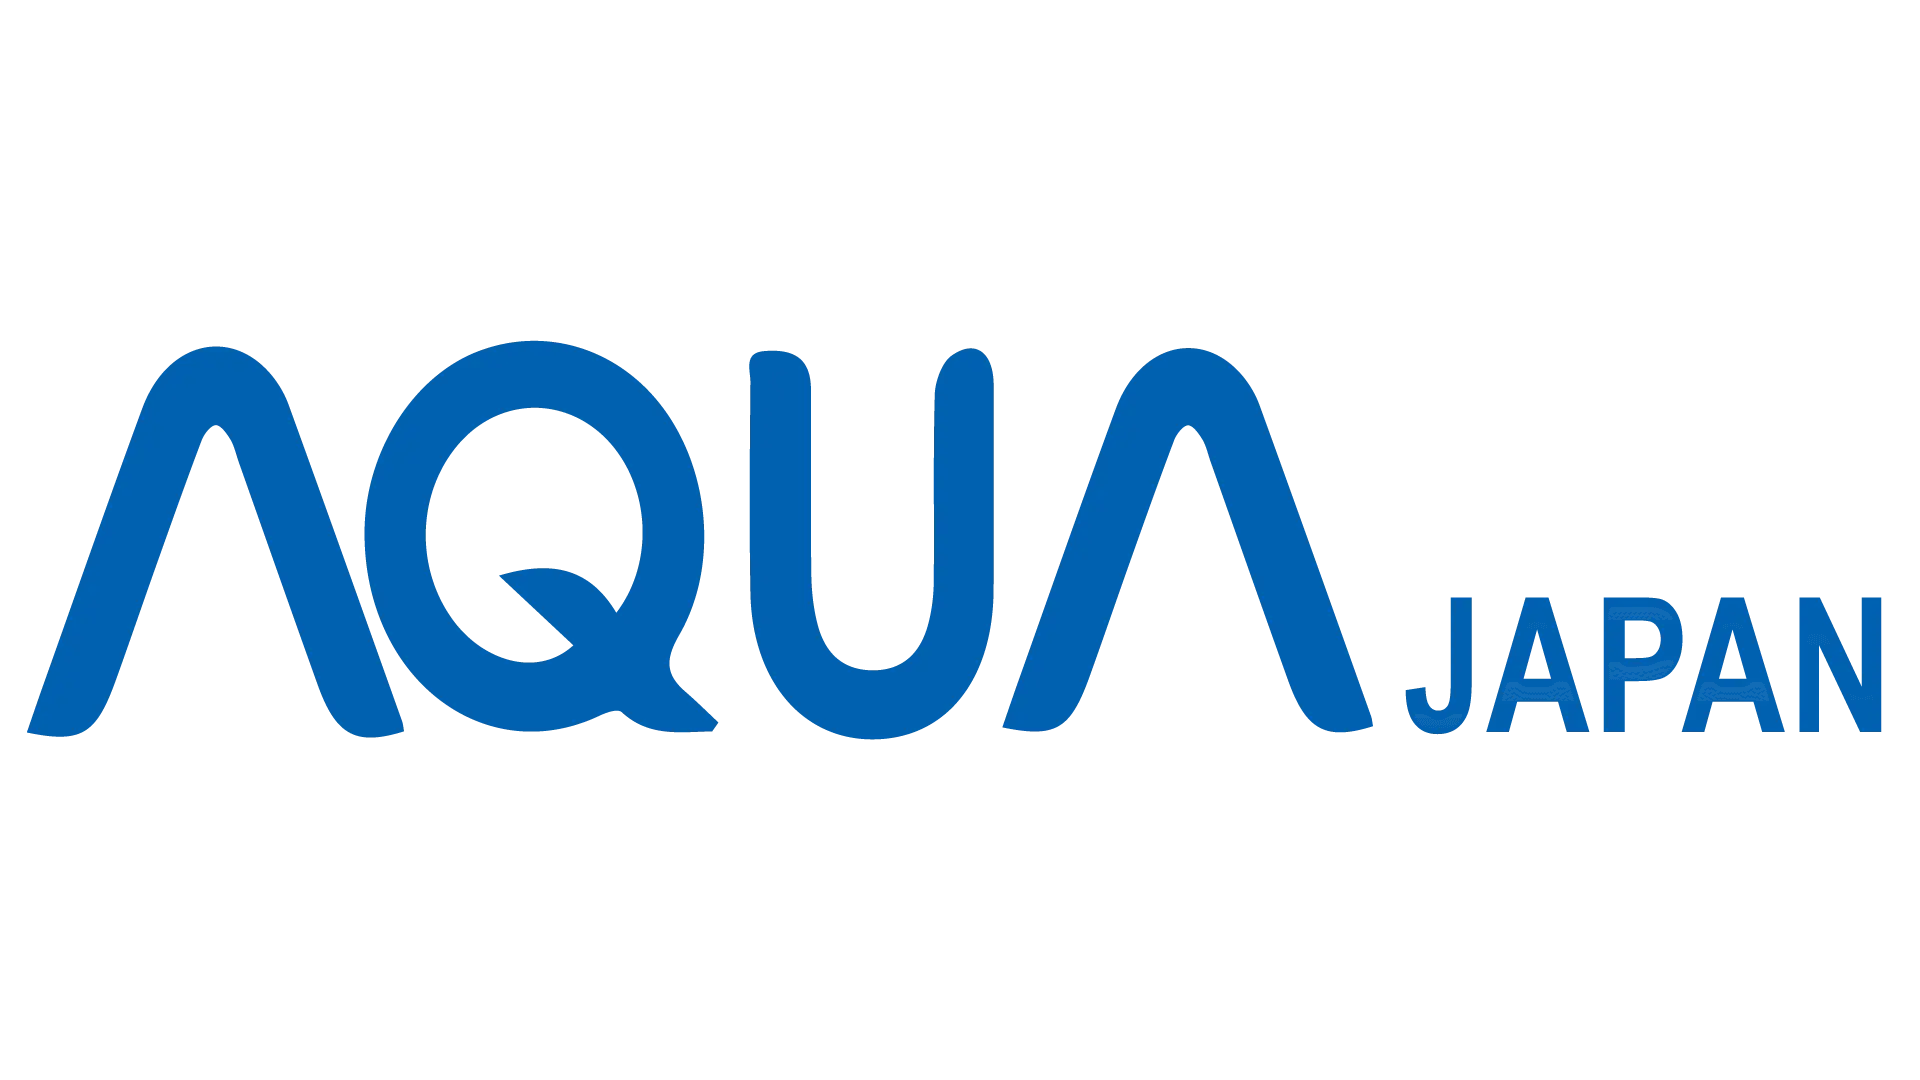 Chatbot manager in the electronics industry owned by Aqua Japan company